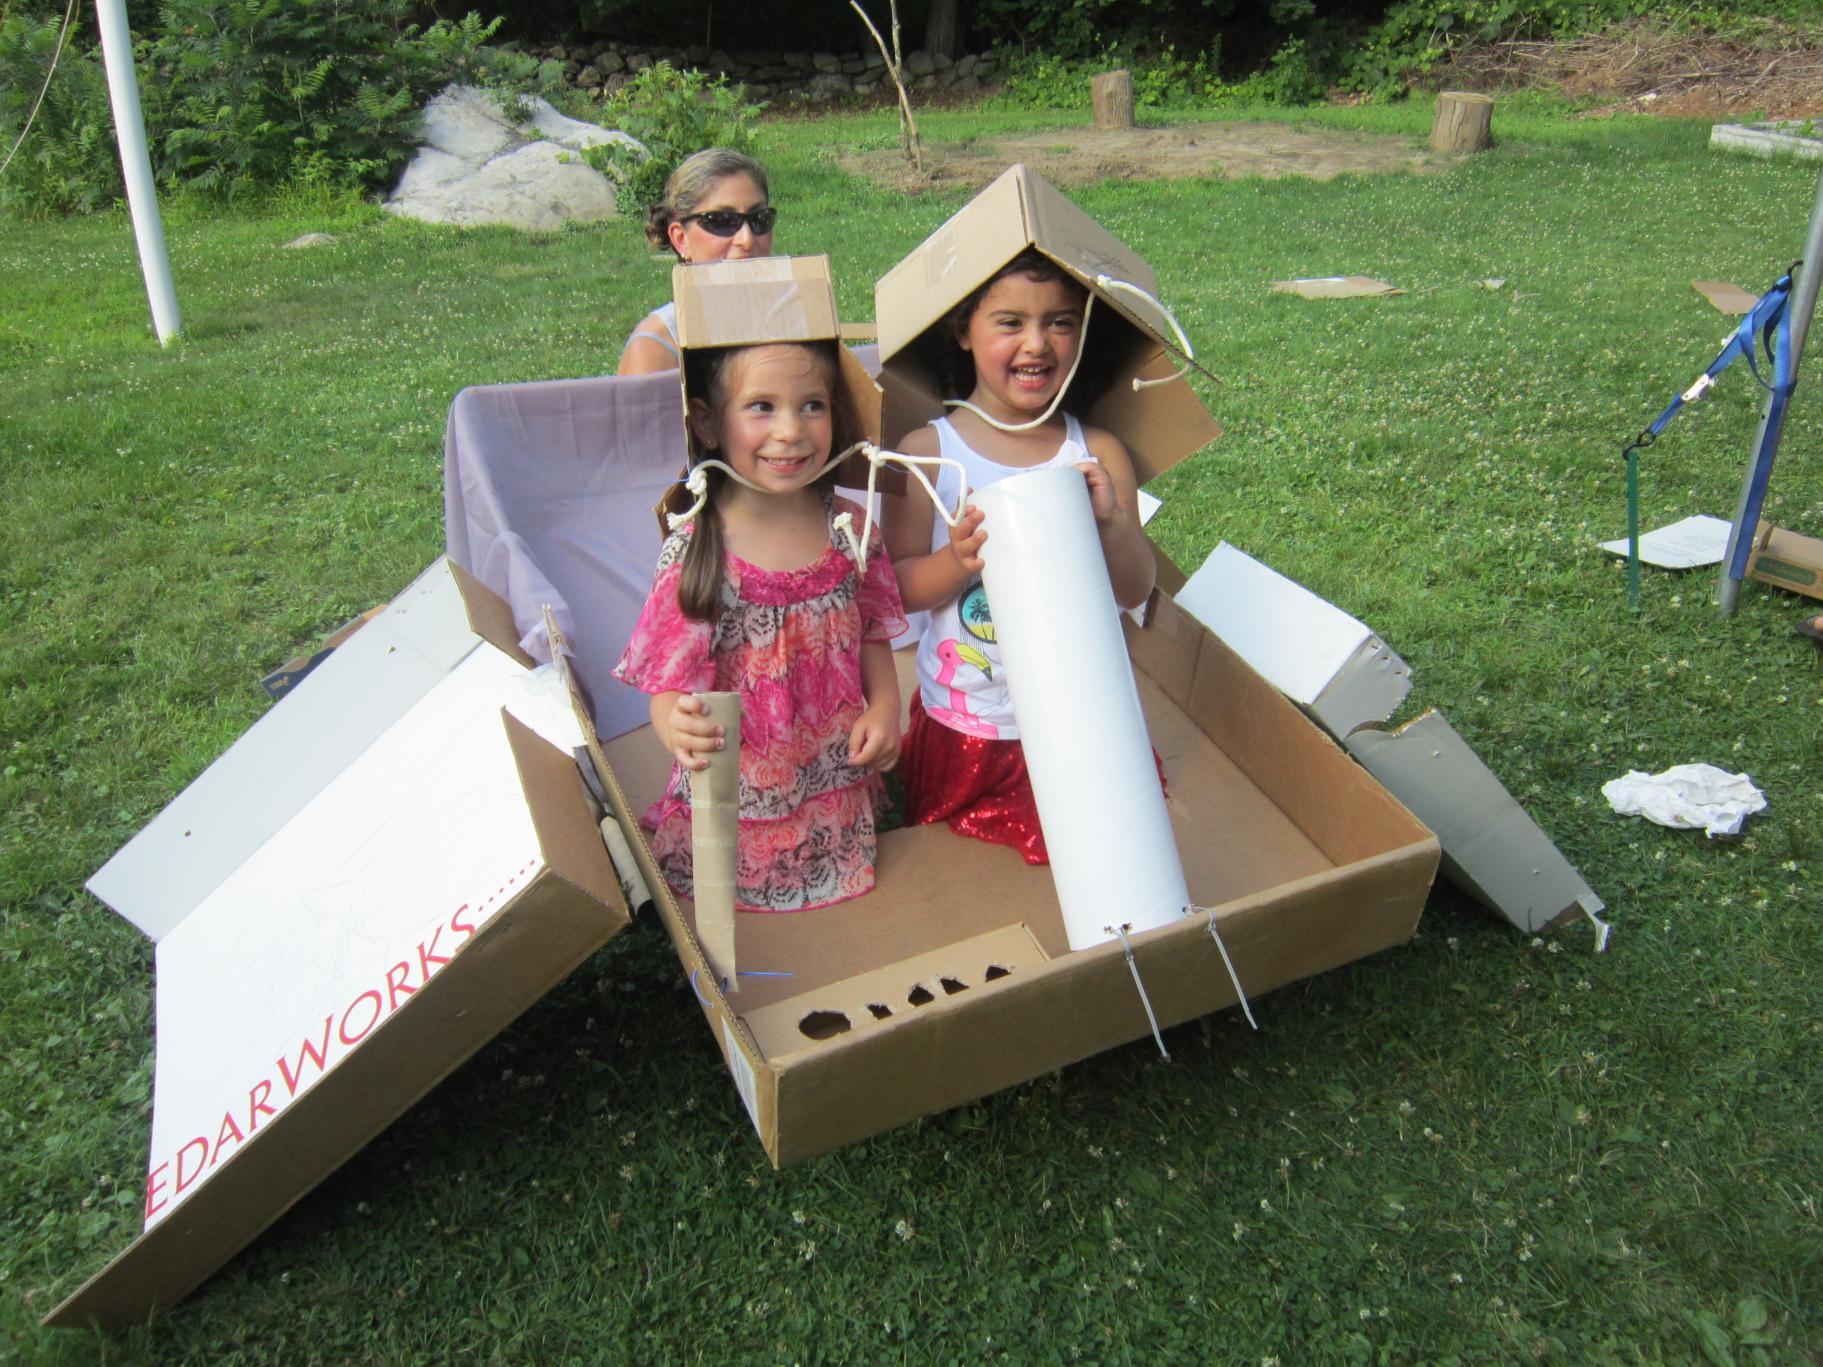 two young girls sit in a cardboard "plane" that they created out of boxes